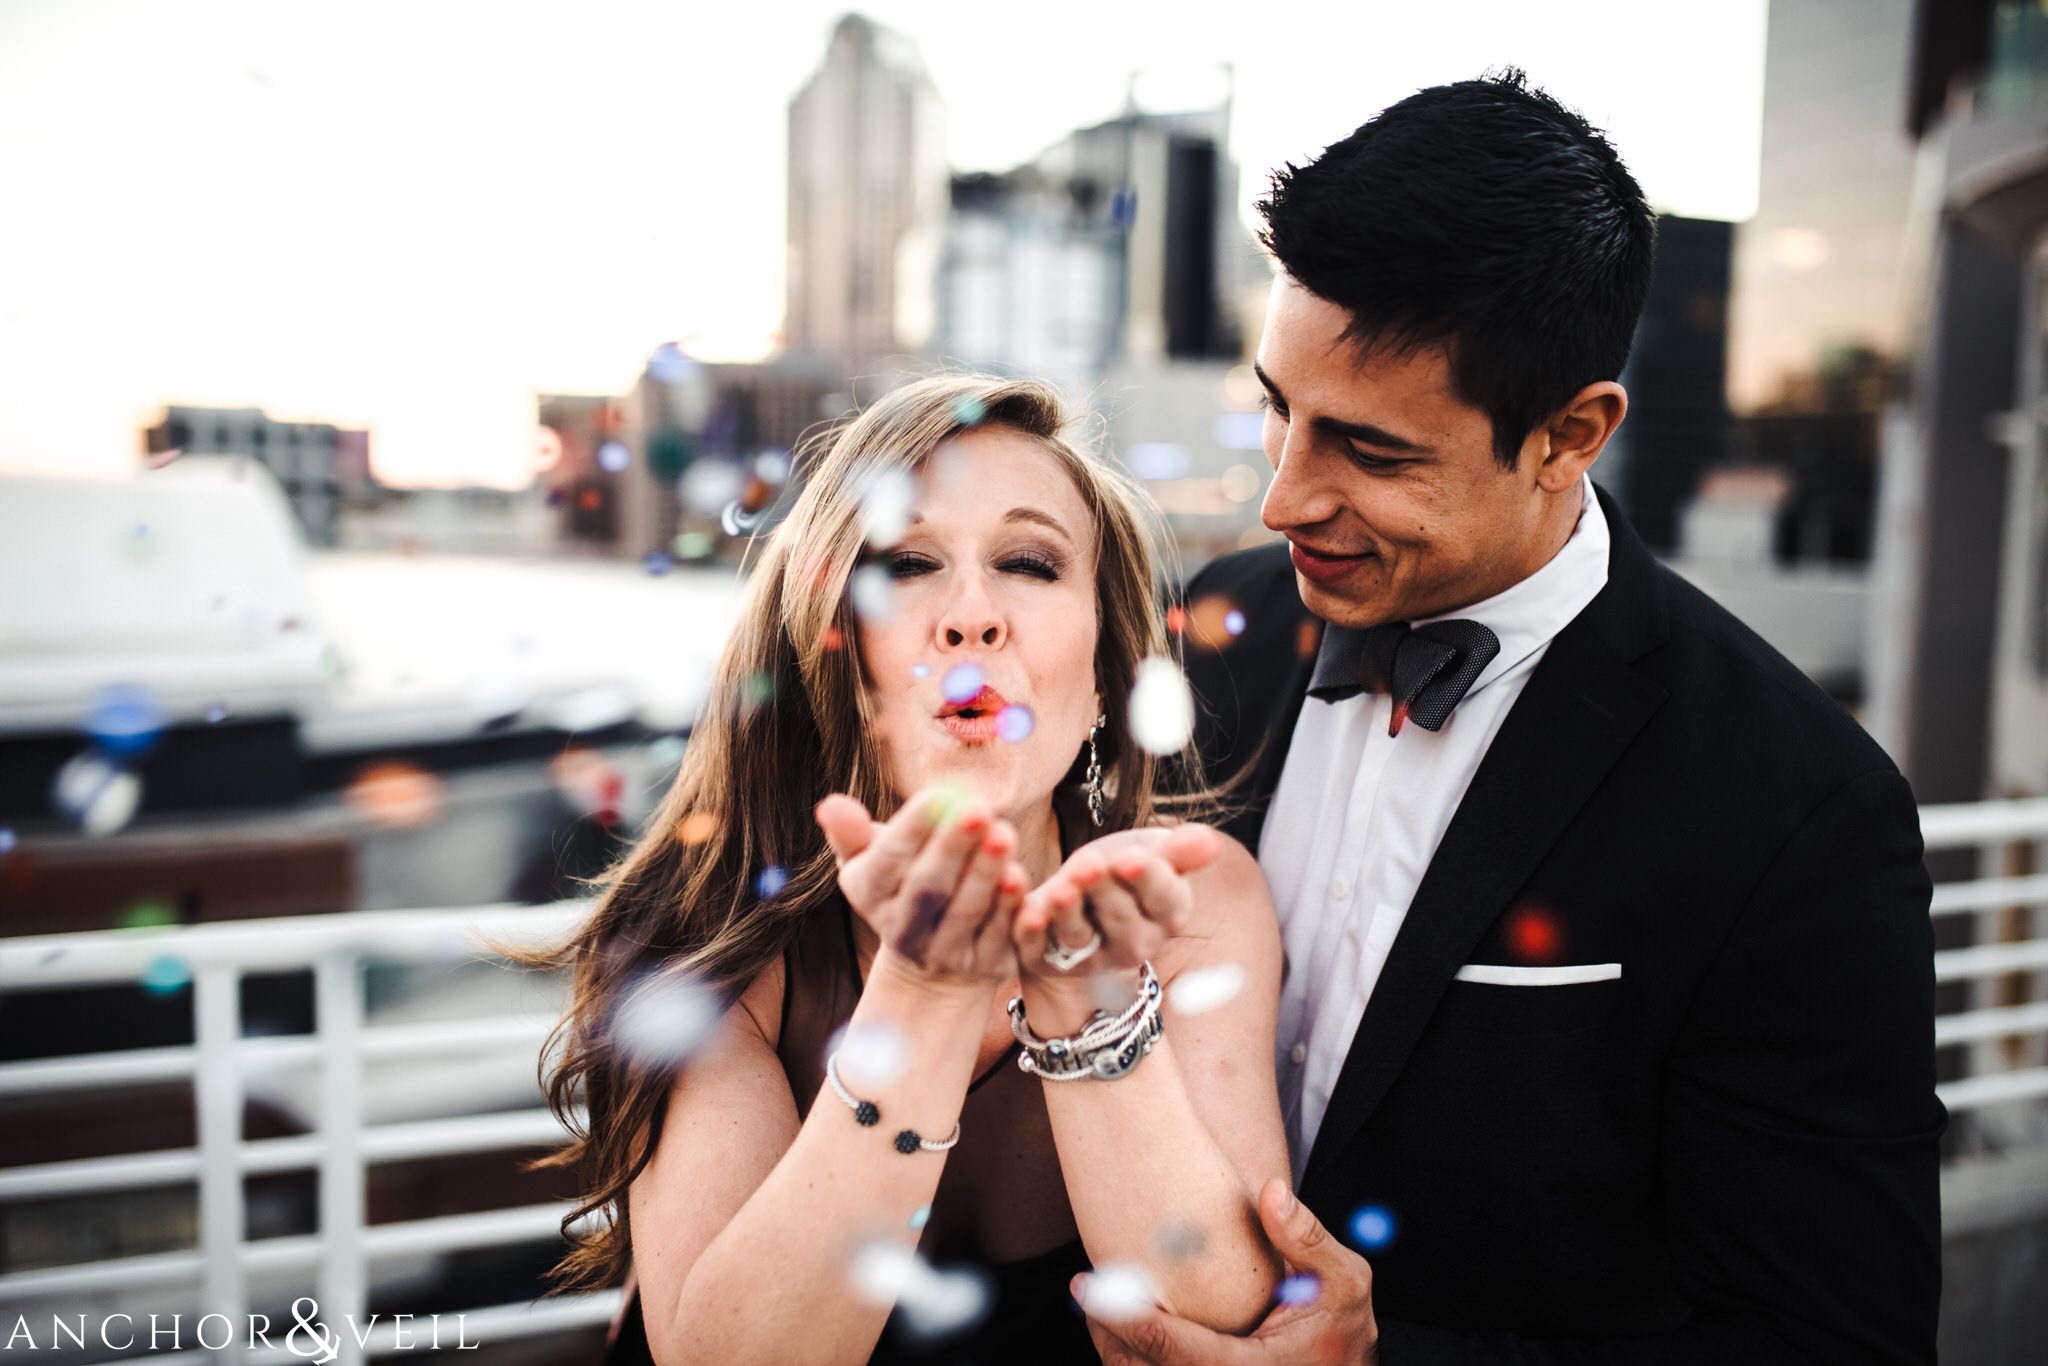 blowing confetti During their Uptown Charlotte Engagement Session